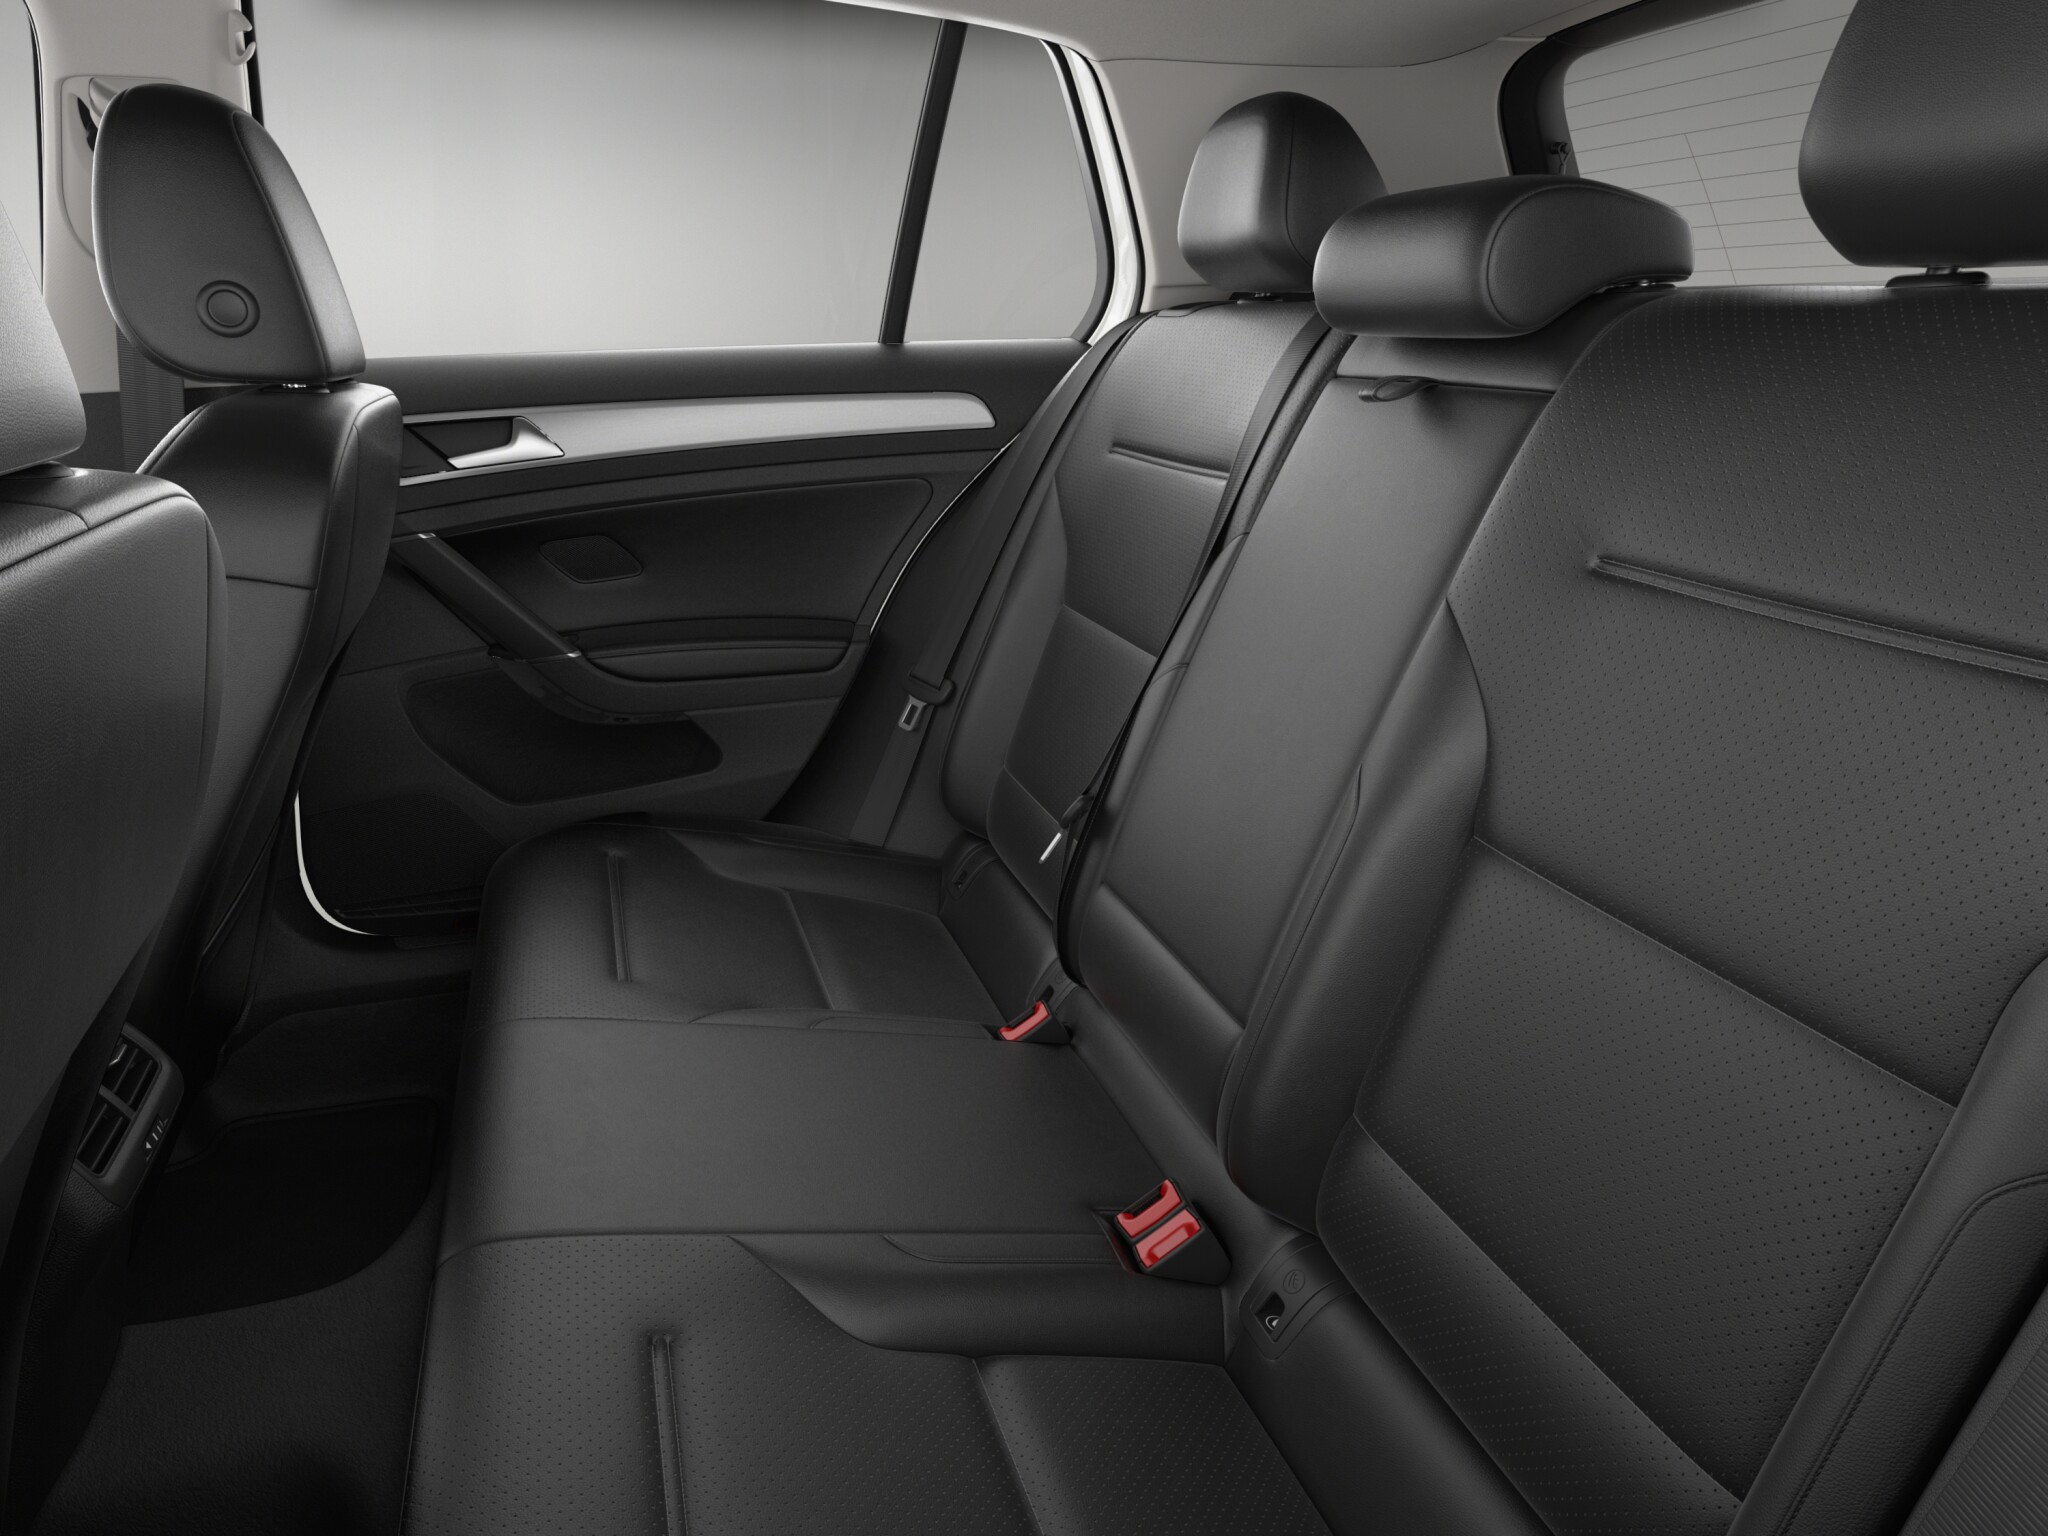 Volkswagen Golf S With Sunroof interior rear seat cross view